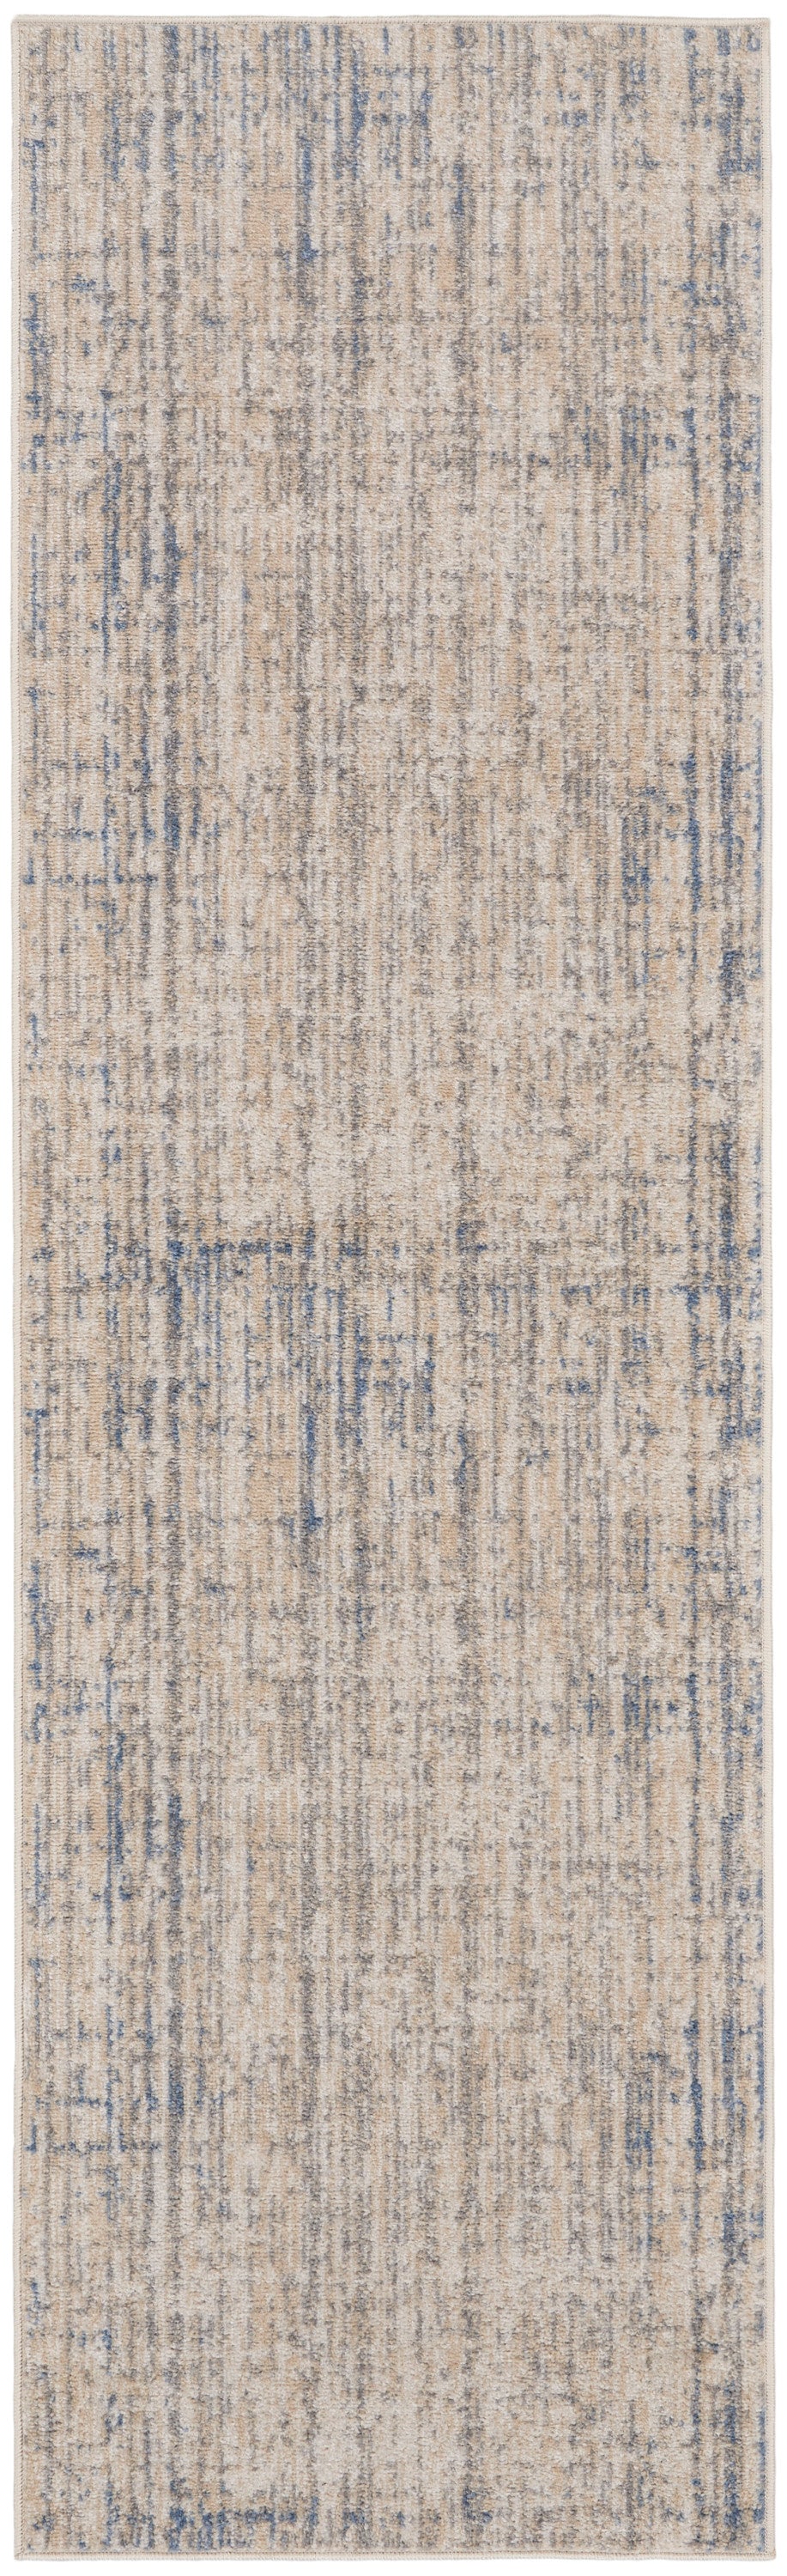 River Flow RFV04 Machine Made Synthetic Blend Indoor Area Rug By Calvin Klein From Nourison Rugs